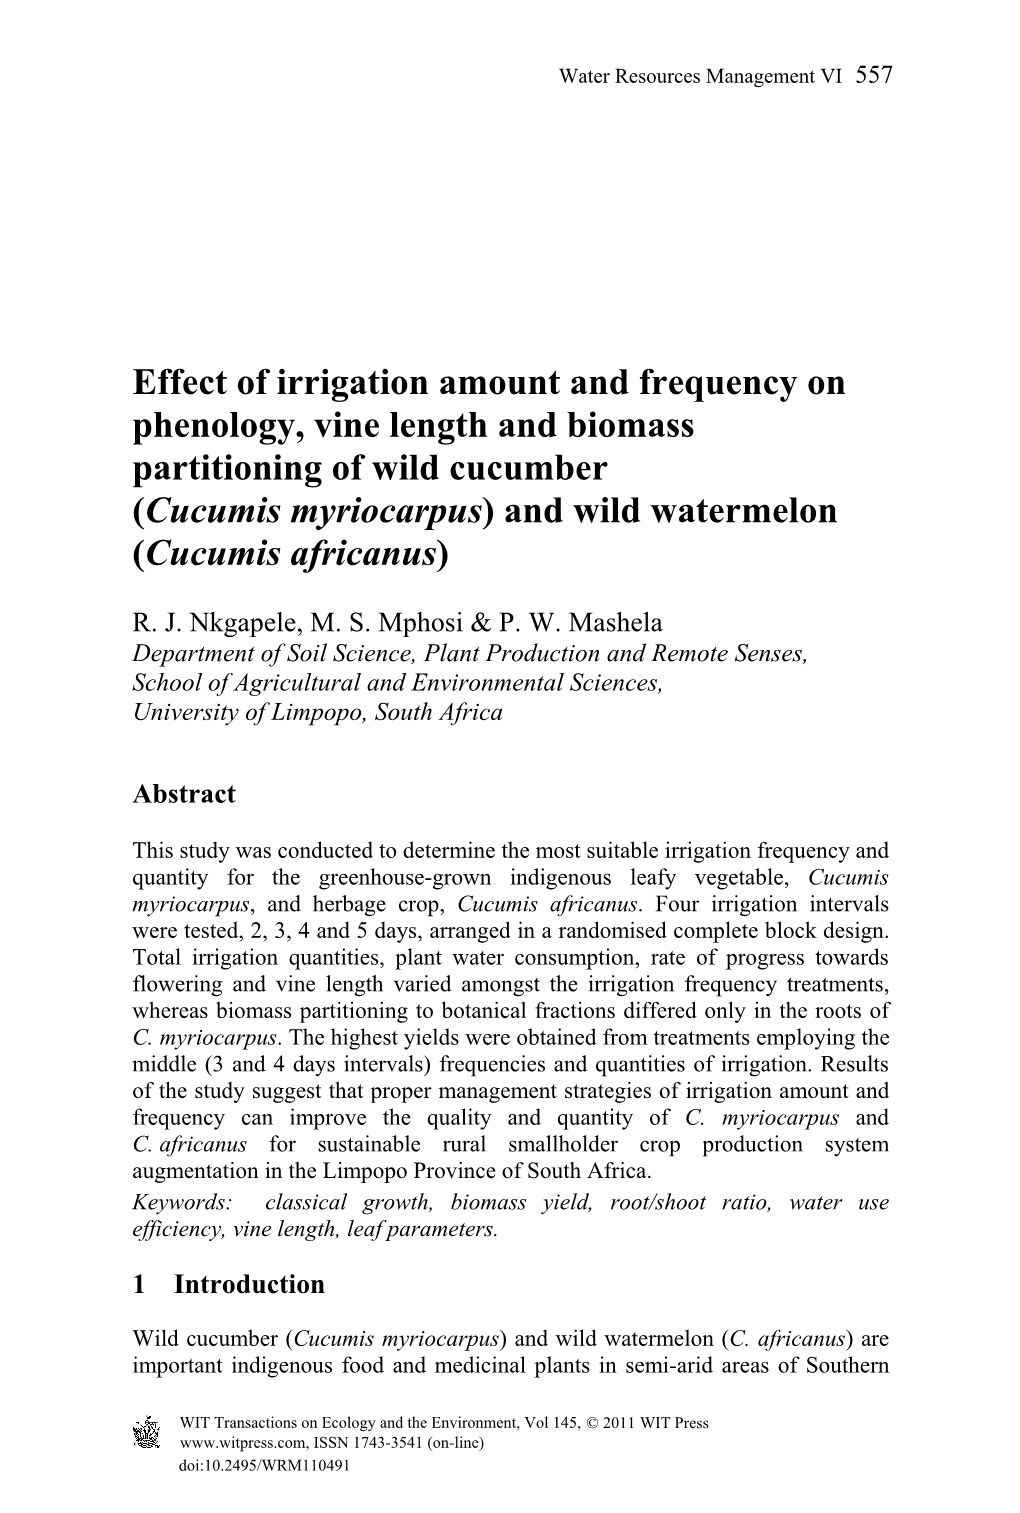 Effect of Irrigation Amount and Frequency on Phenology, Vine